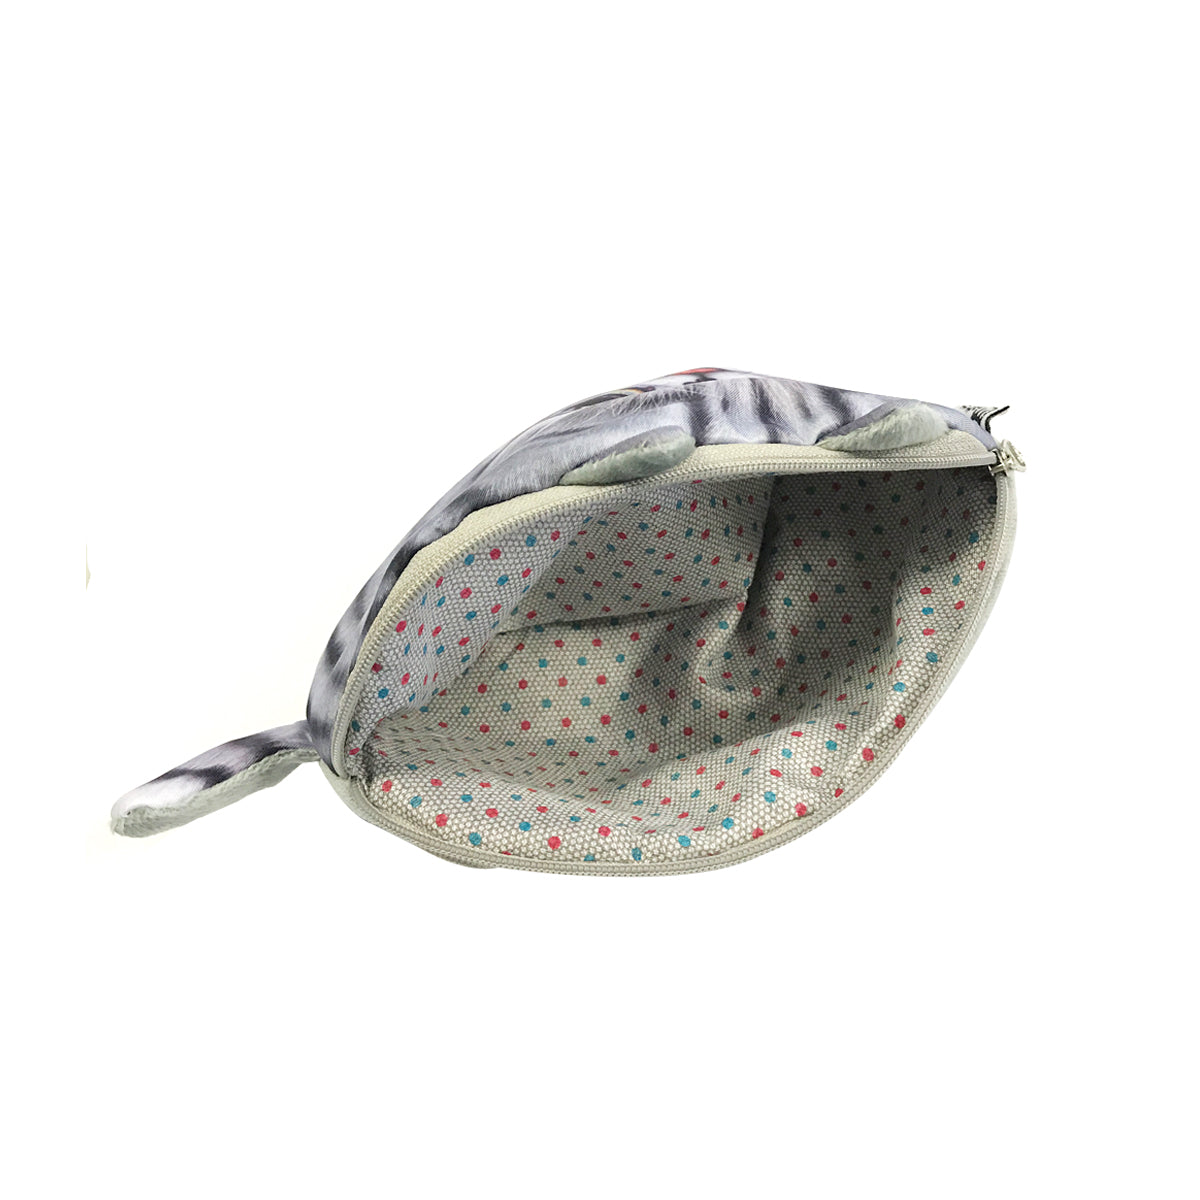 Wrapables Cat Face Cosmetic Pouch Pencil Case (Set of 2)